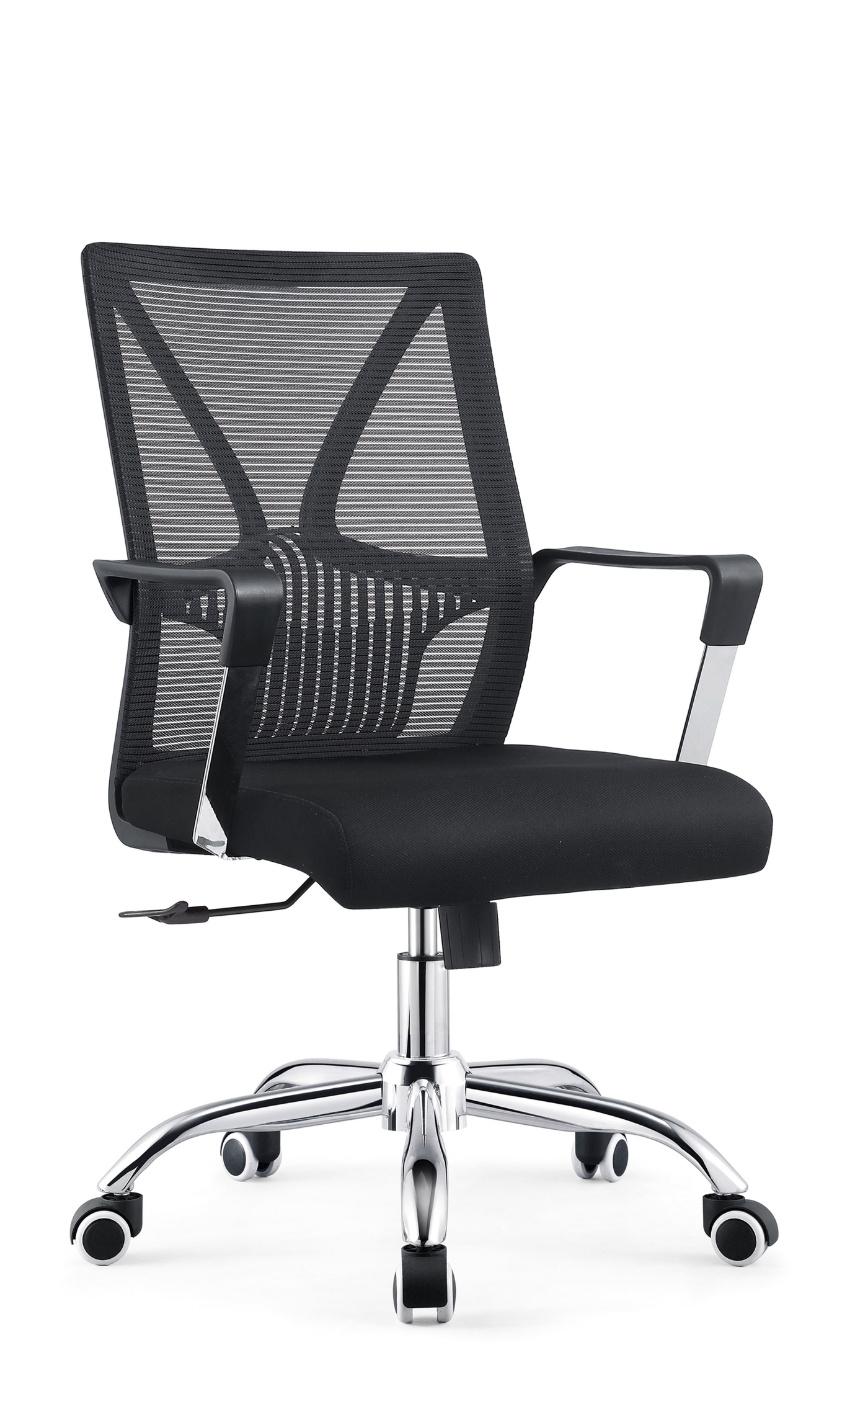 Adjustable Mesh Back Office Chair with Headrest-1921b (BIFMA)